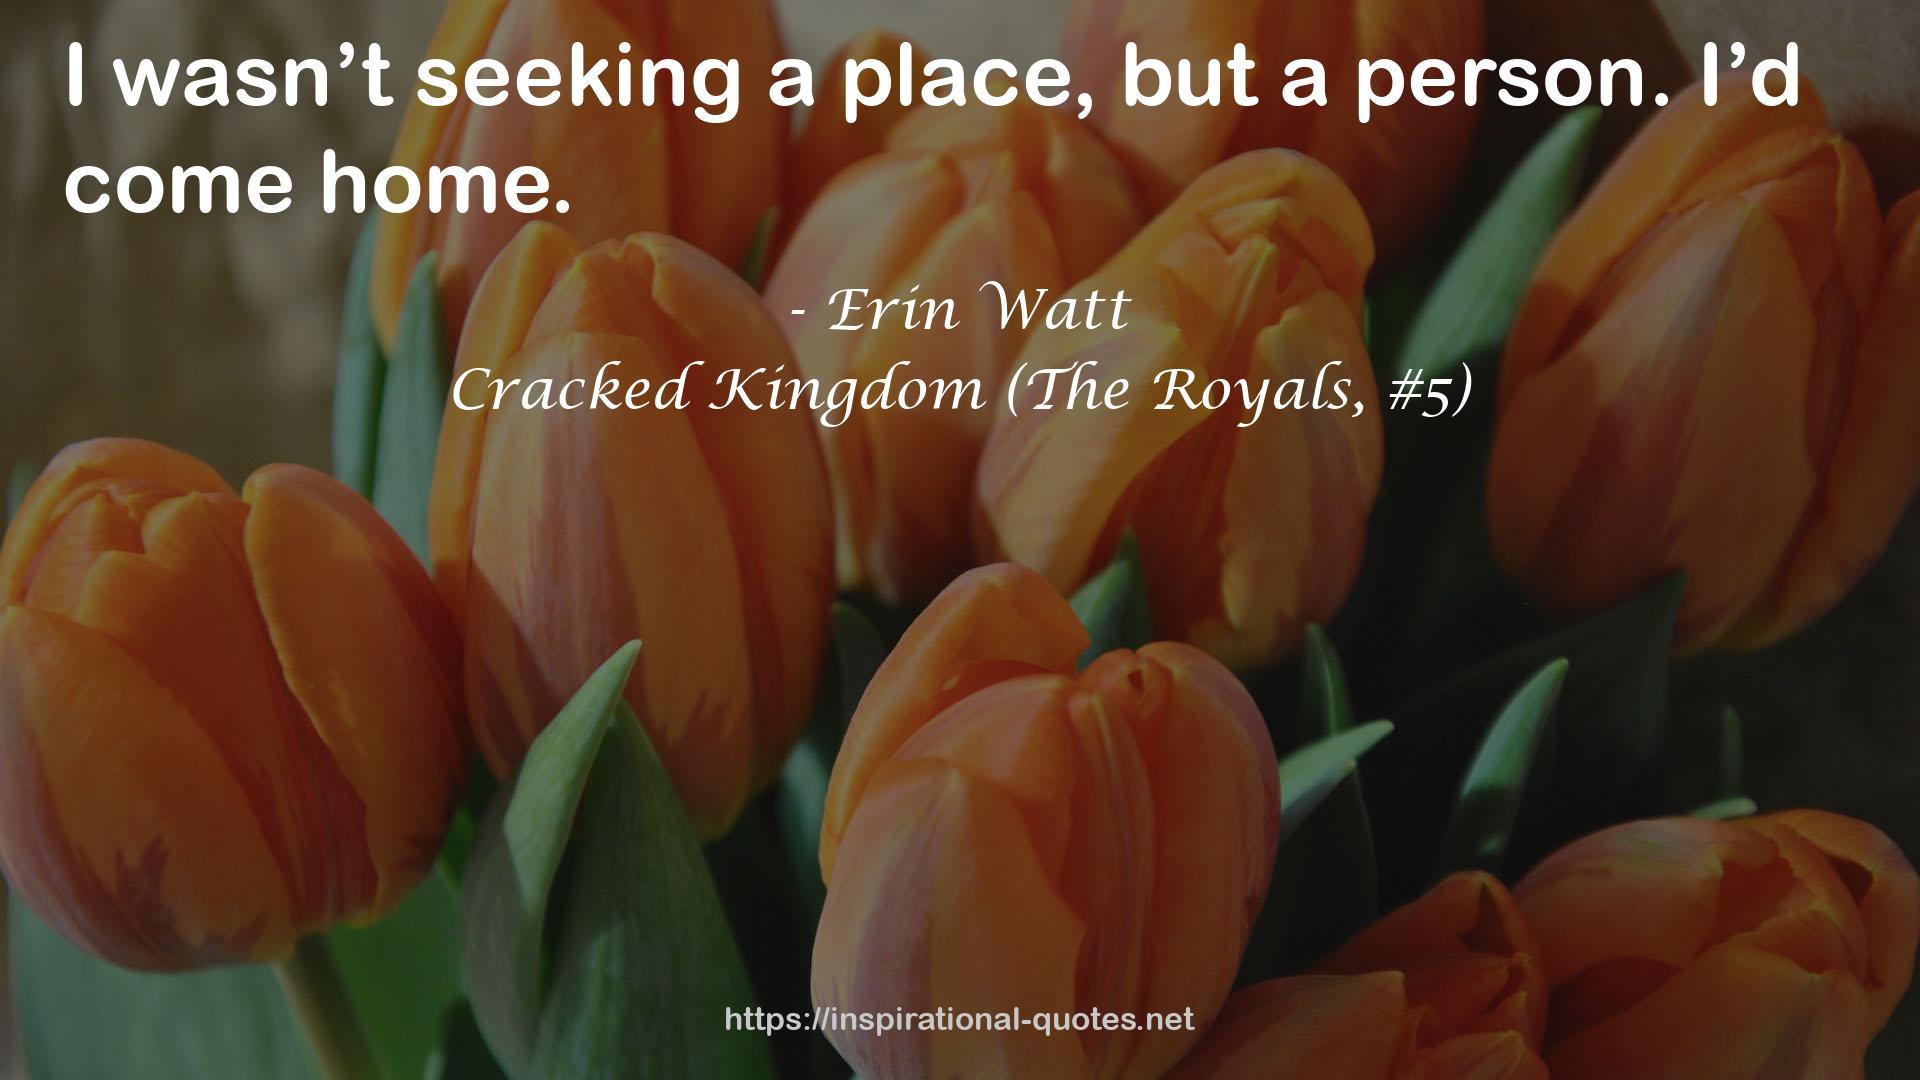 Cracked Kingdom (The Royals, #5) QUOTES